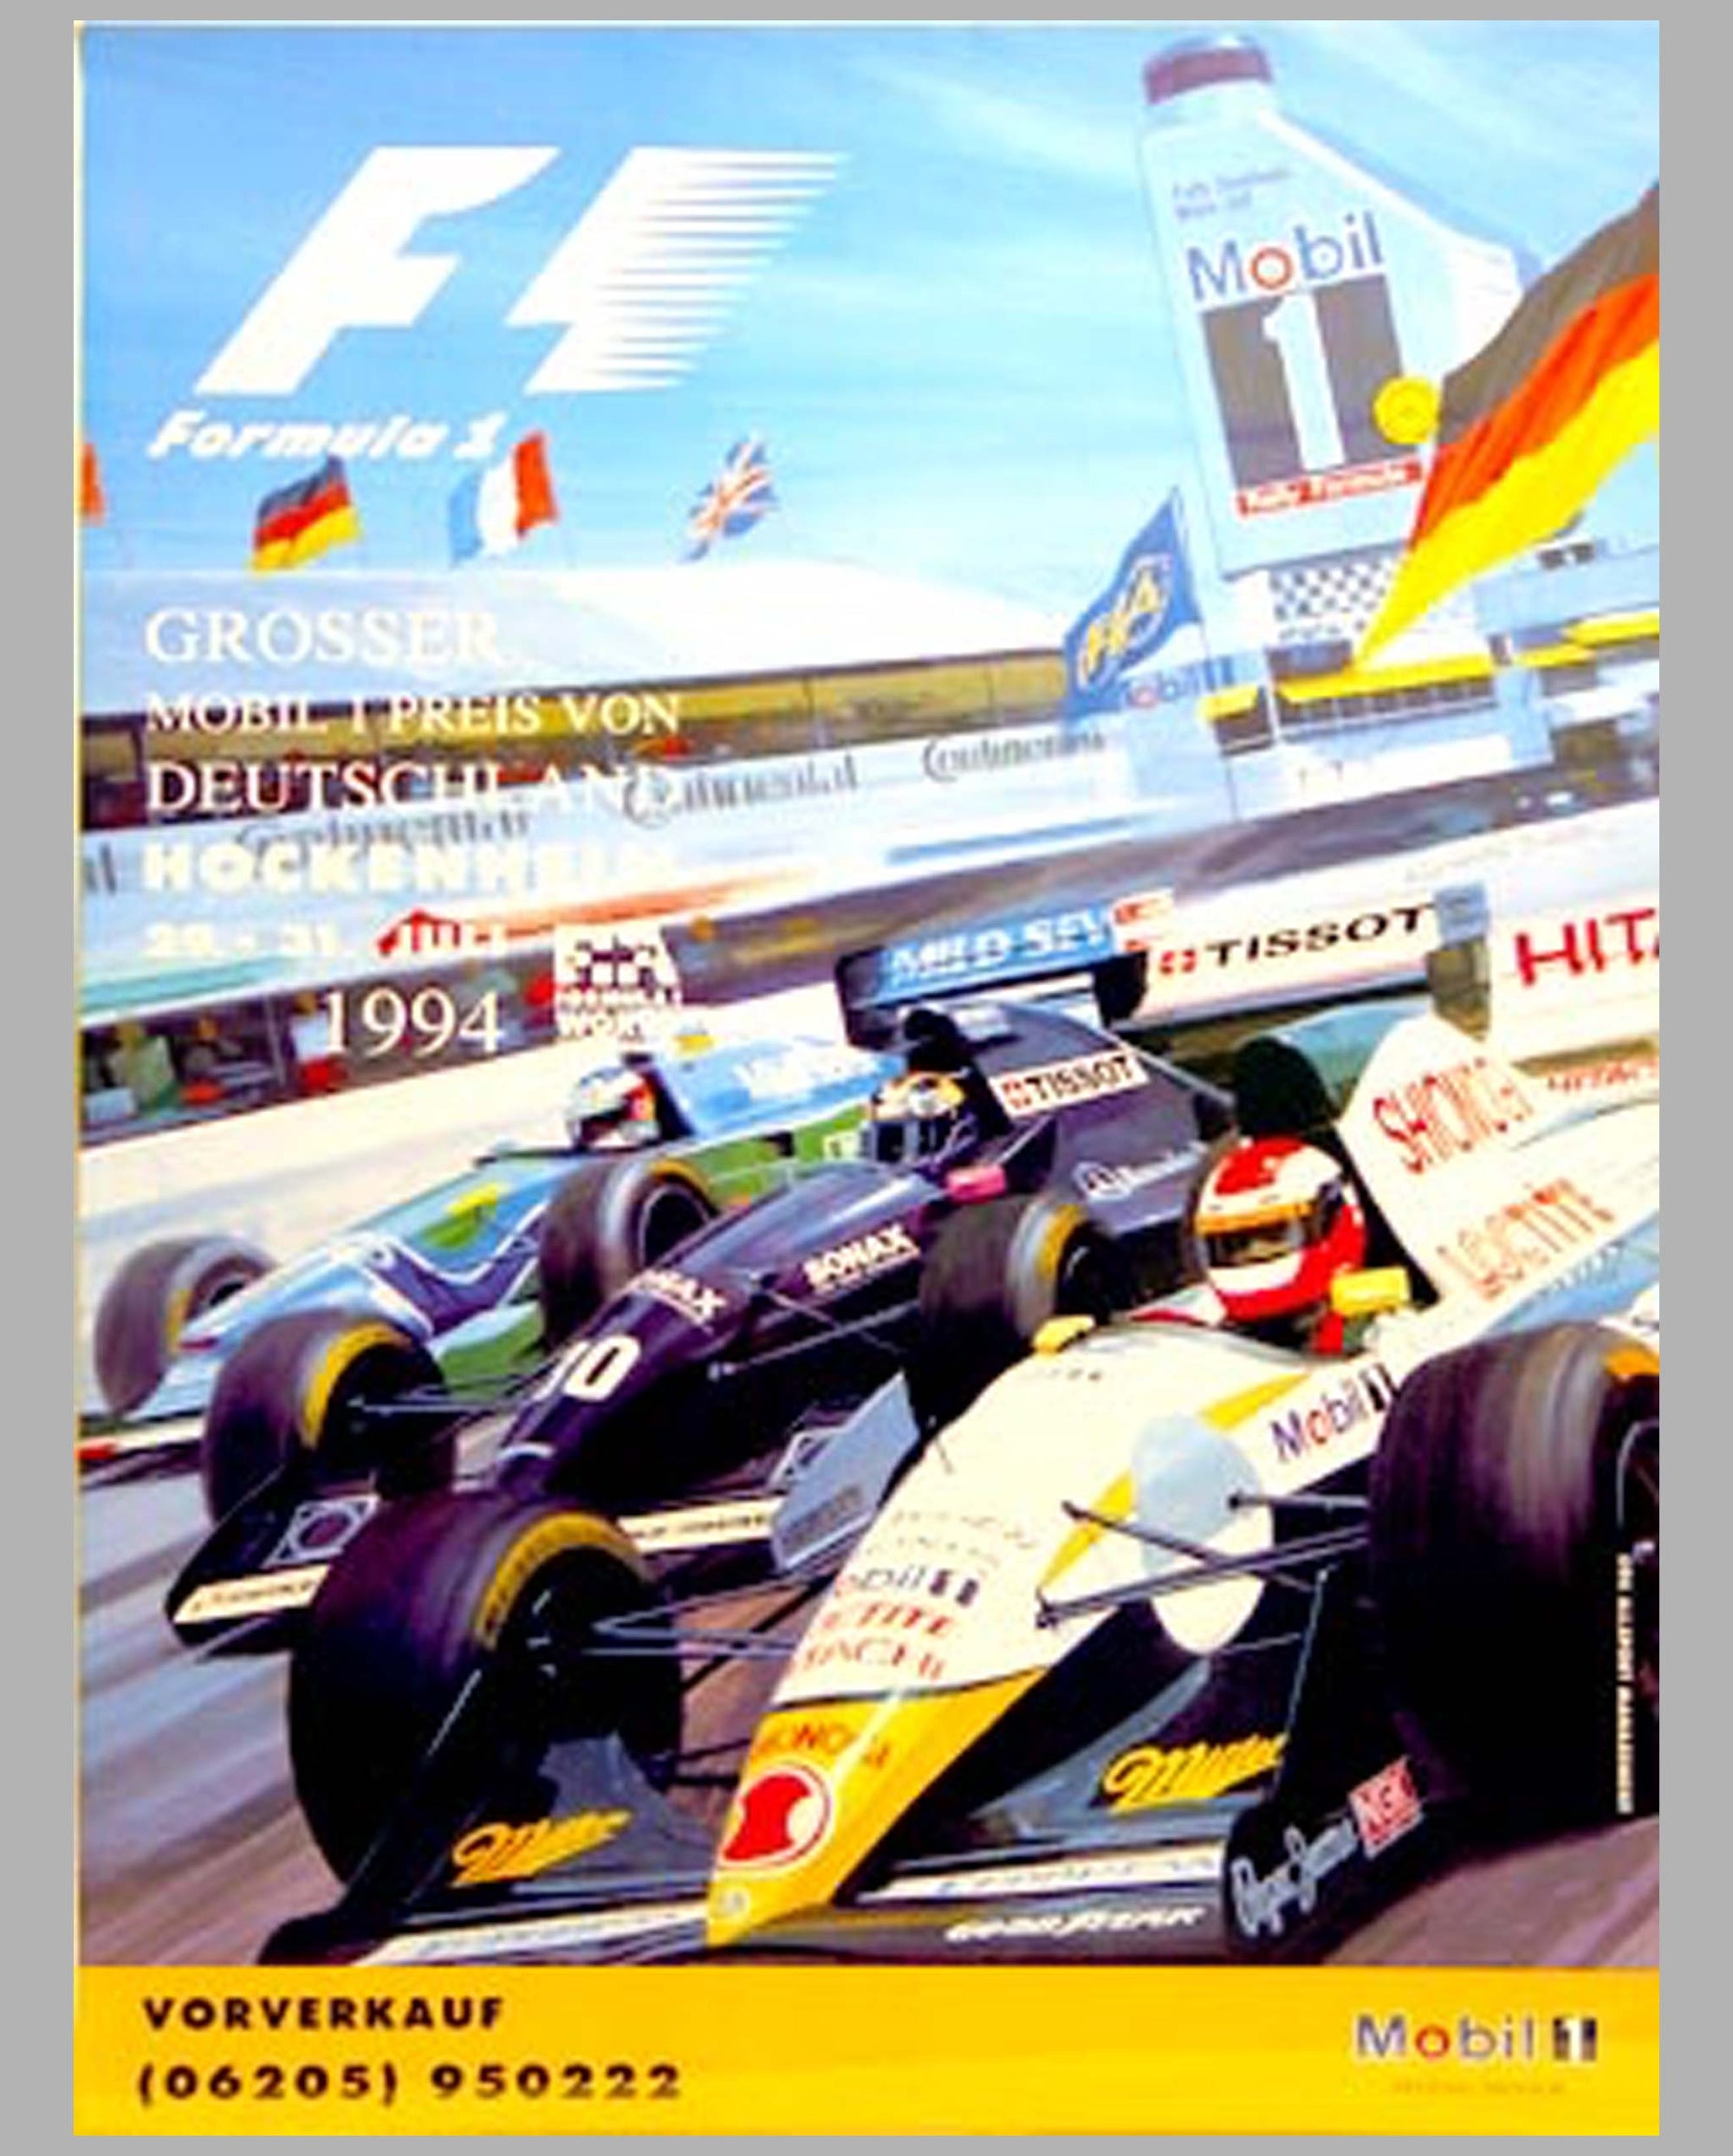 GP of Germany-Hockenheim-1994 official event poster